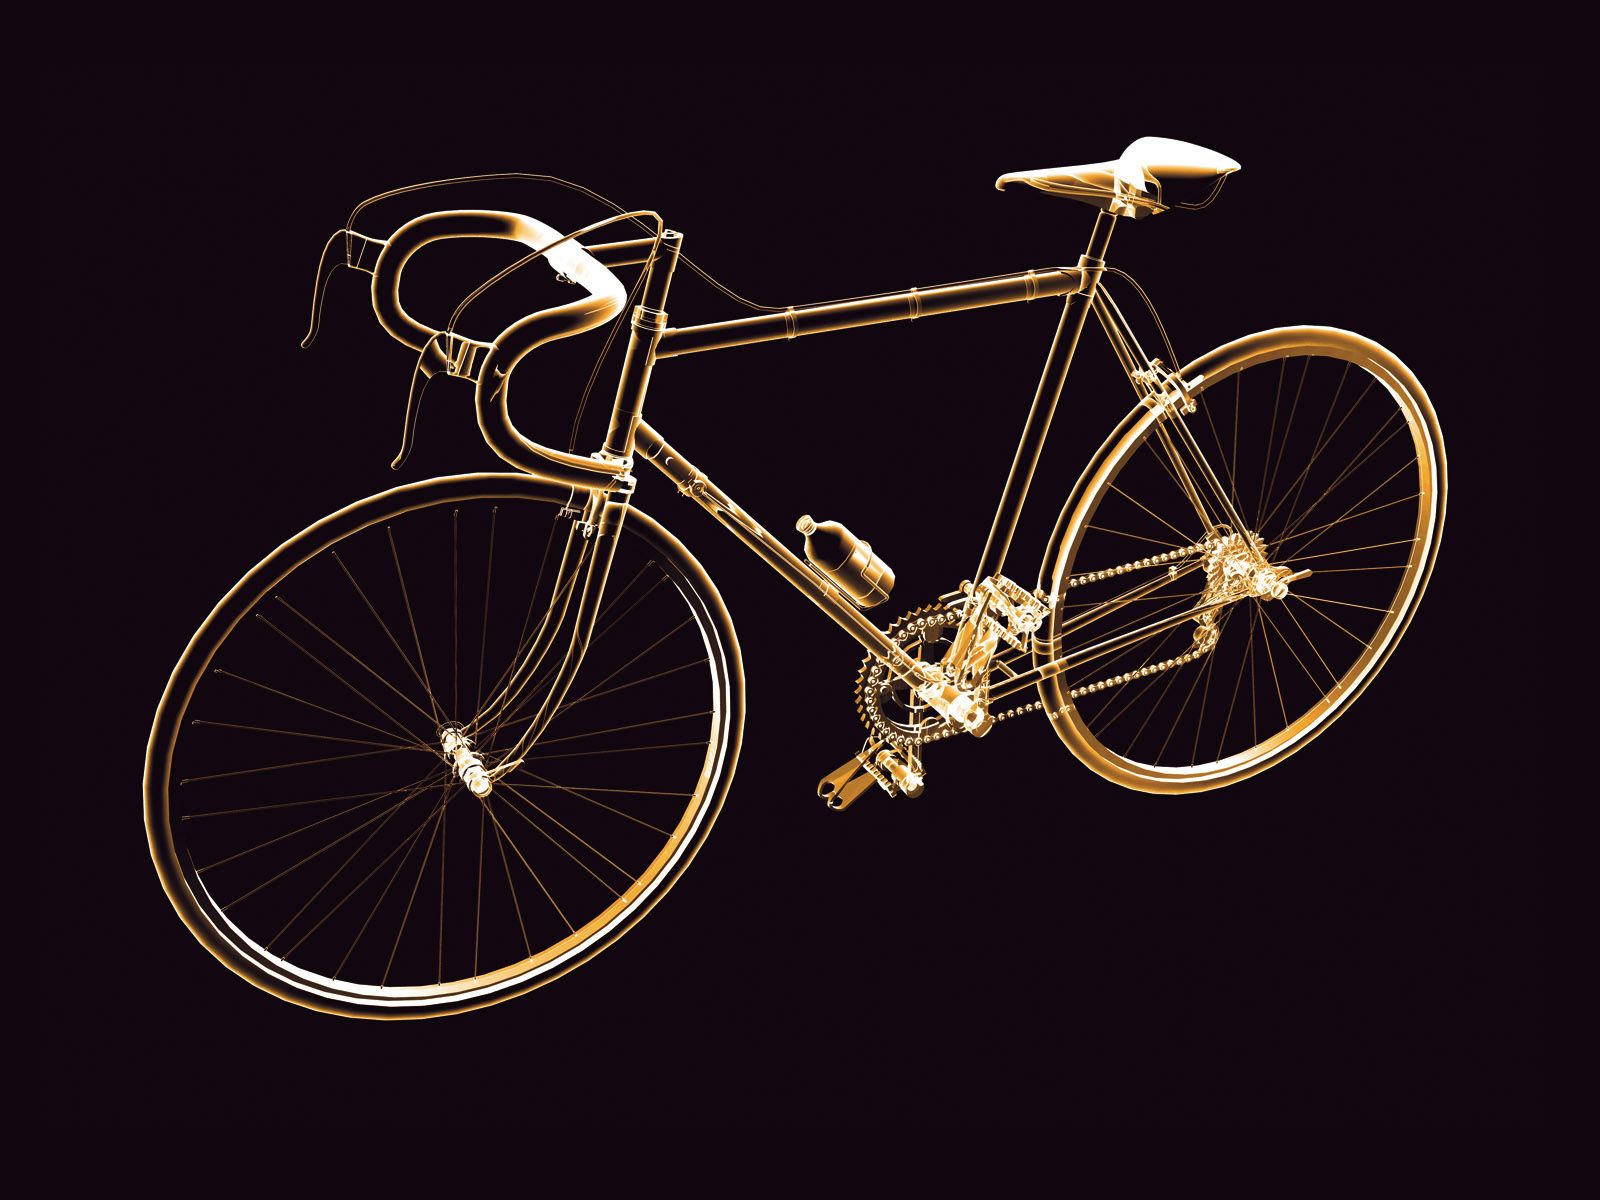 Neon Bicycle wallpaper. Neon Bicycle